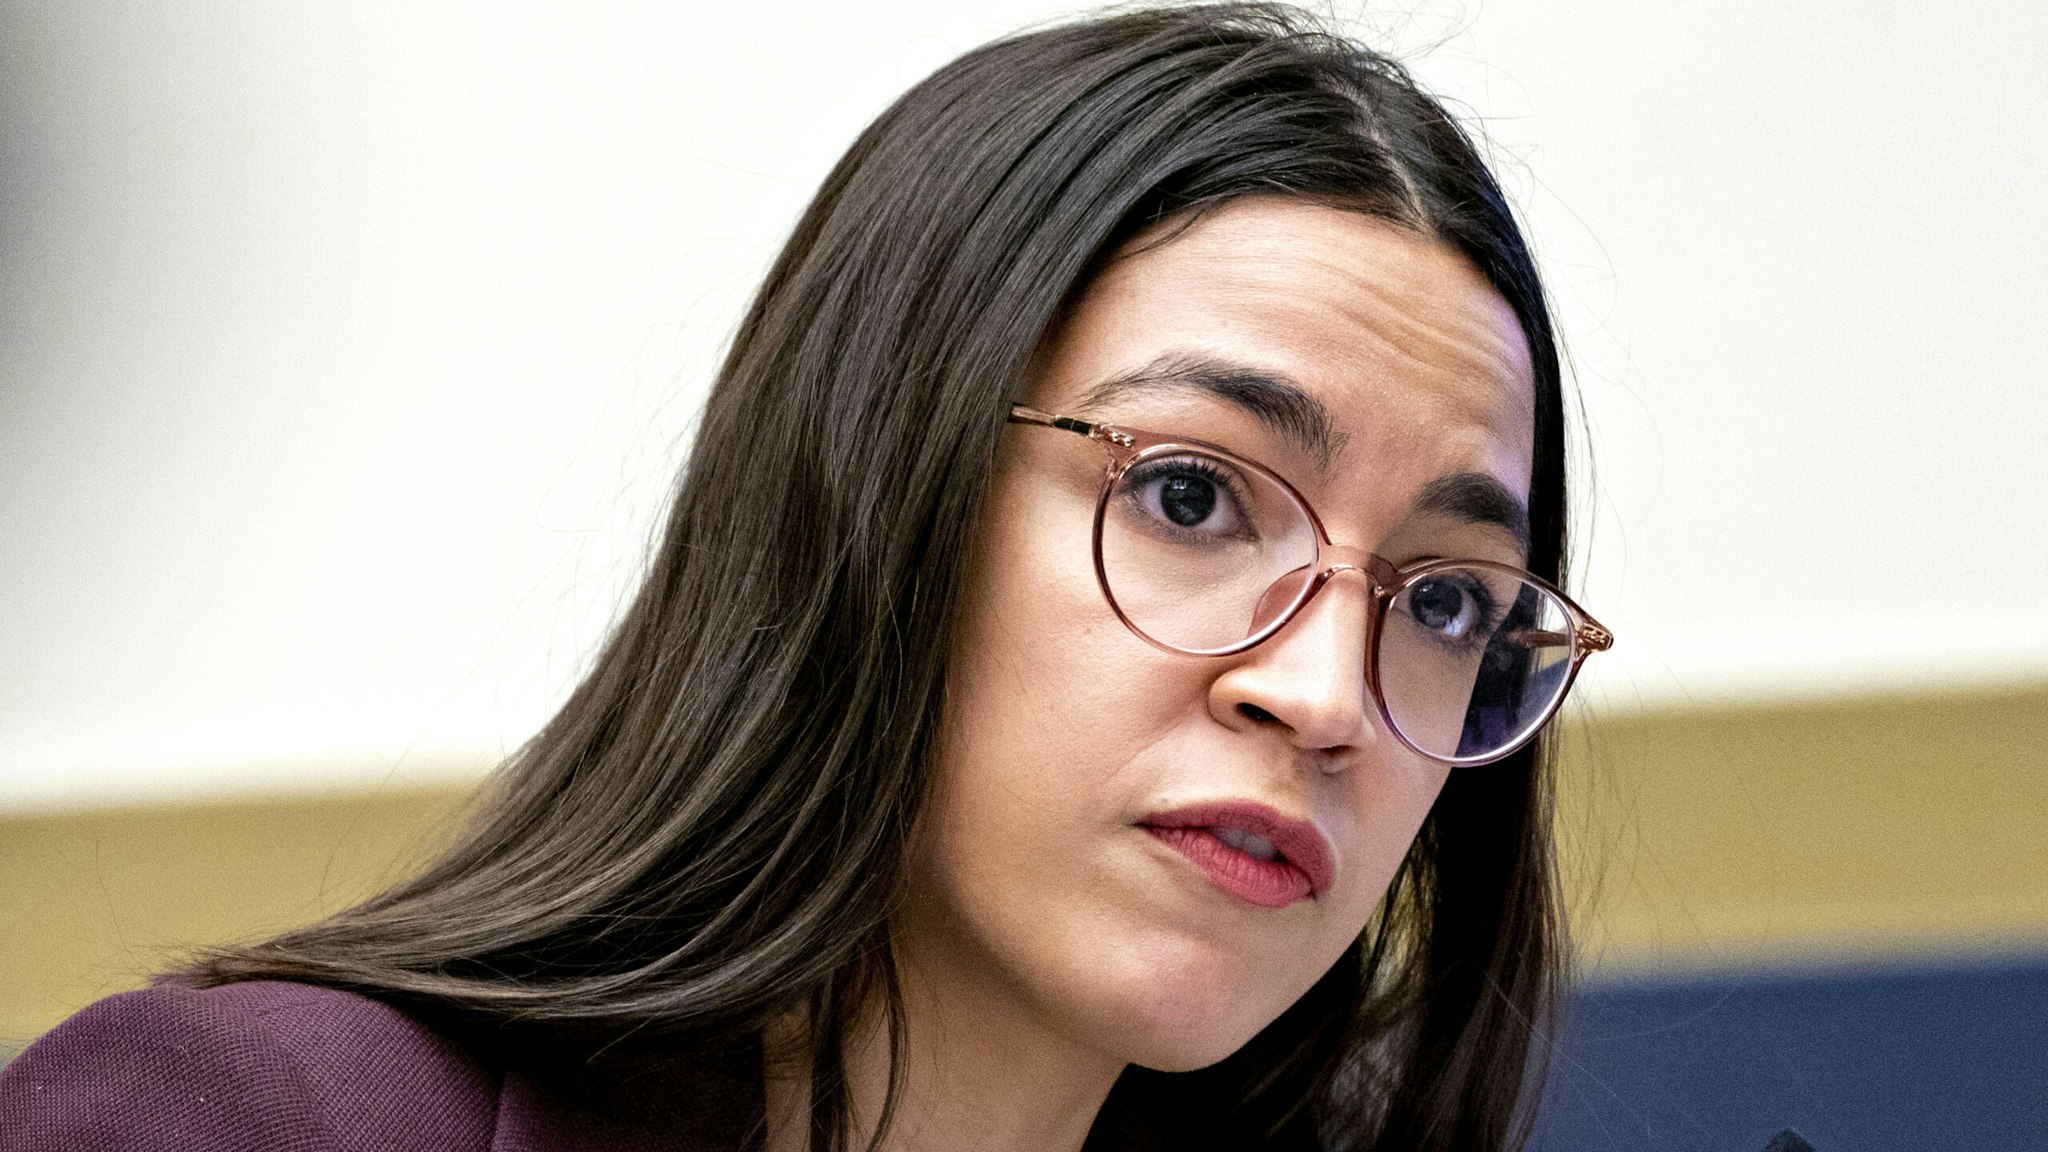 Representative Alexandria Ocasio-Cortez, a Democrat from New York, questions Steven Mnuchin, U.S. Treasury secretary, not pictured, during a House Financial Services Committee hearing in Washington, D.C., U.S., on Thursday, Dec. 5, 2019. Mnuchin said he and the Federal Reserve Chairman dont expect the U.S. to create a digital currency.